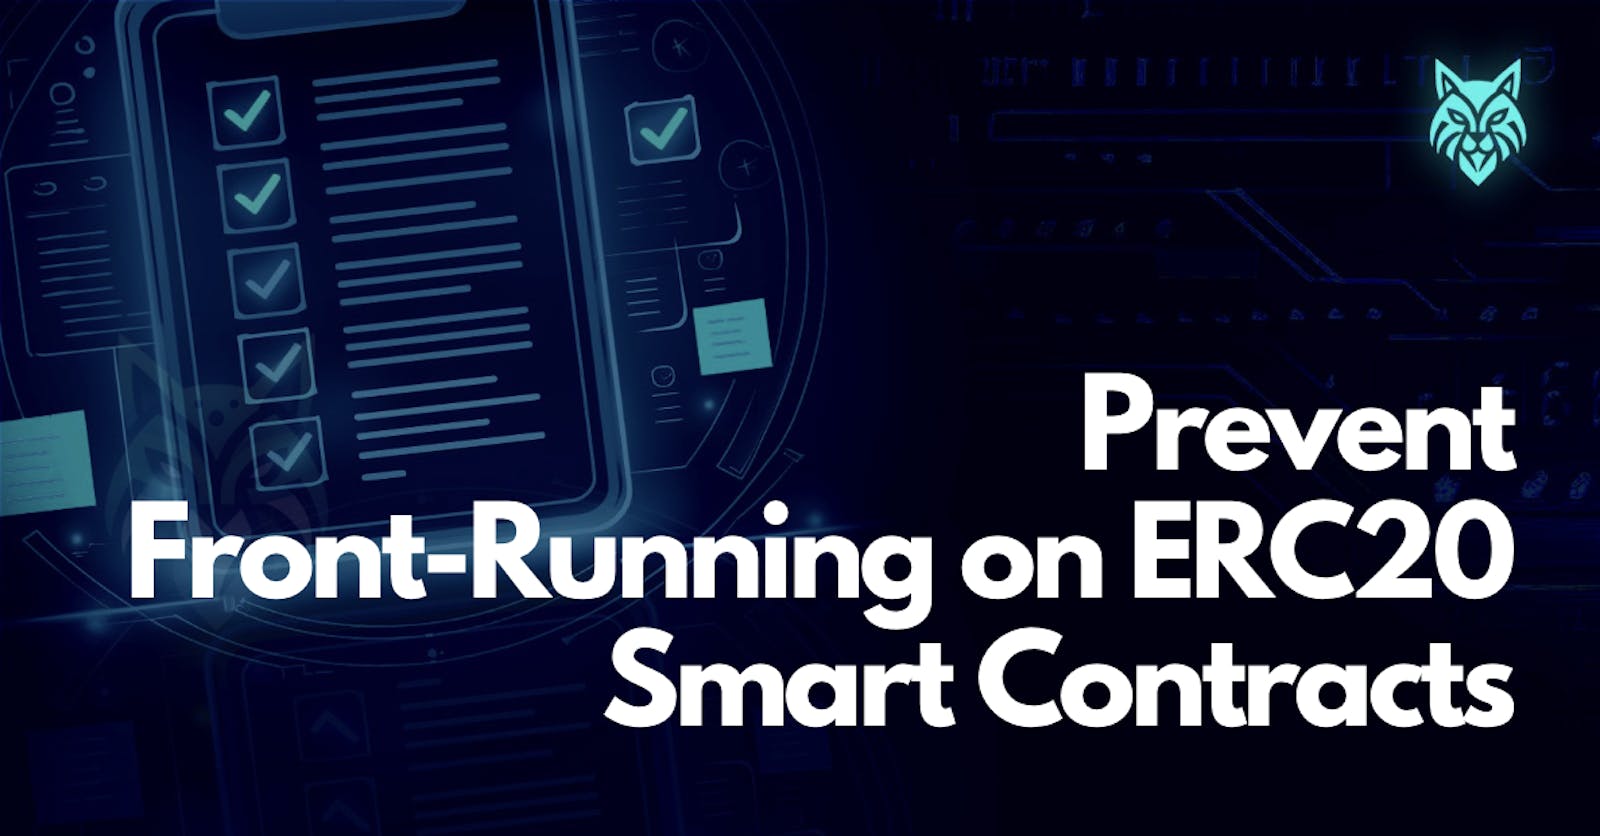 Prevent Front-Running on ERC20 Smart Contracts